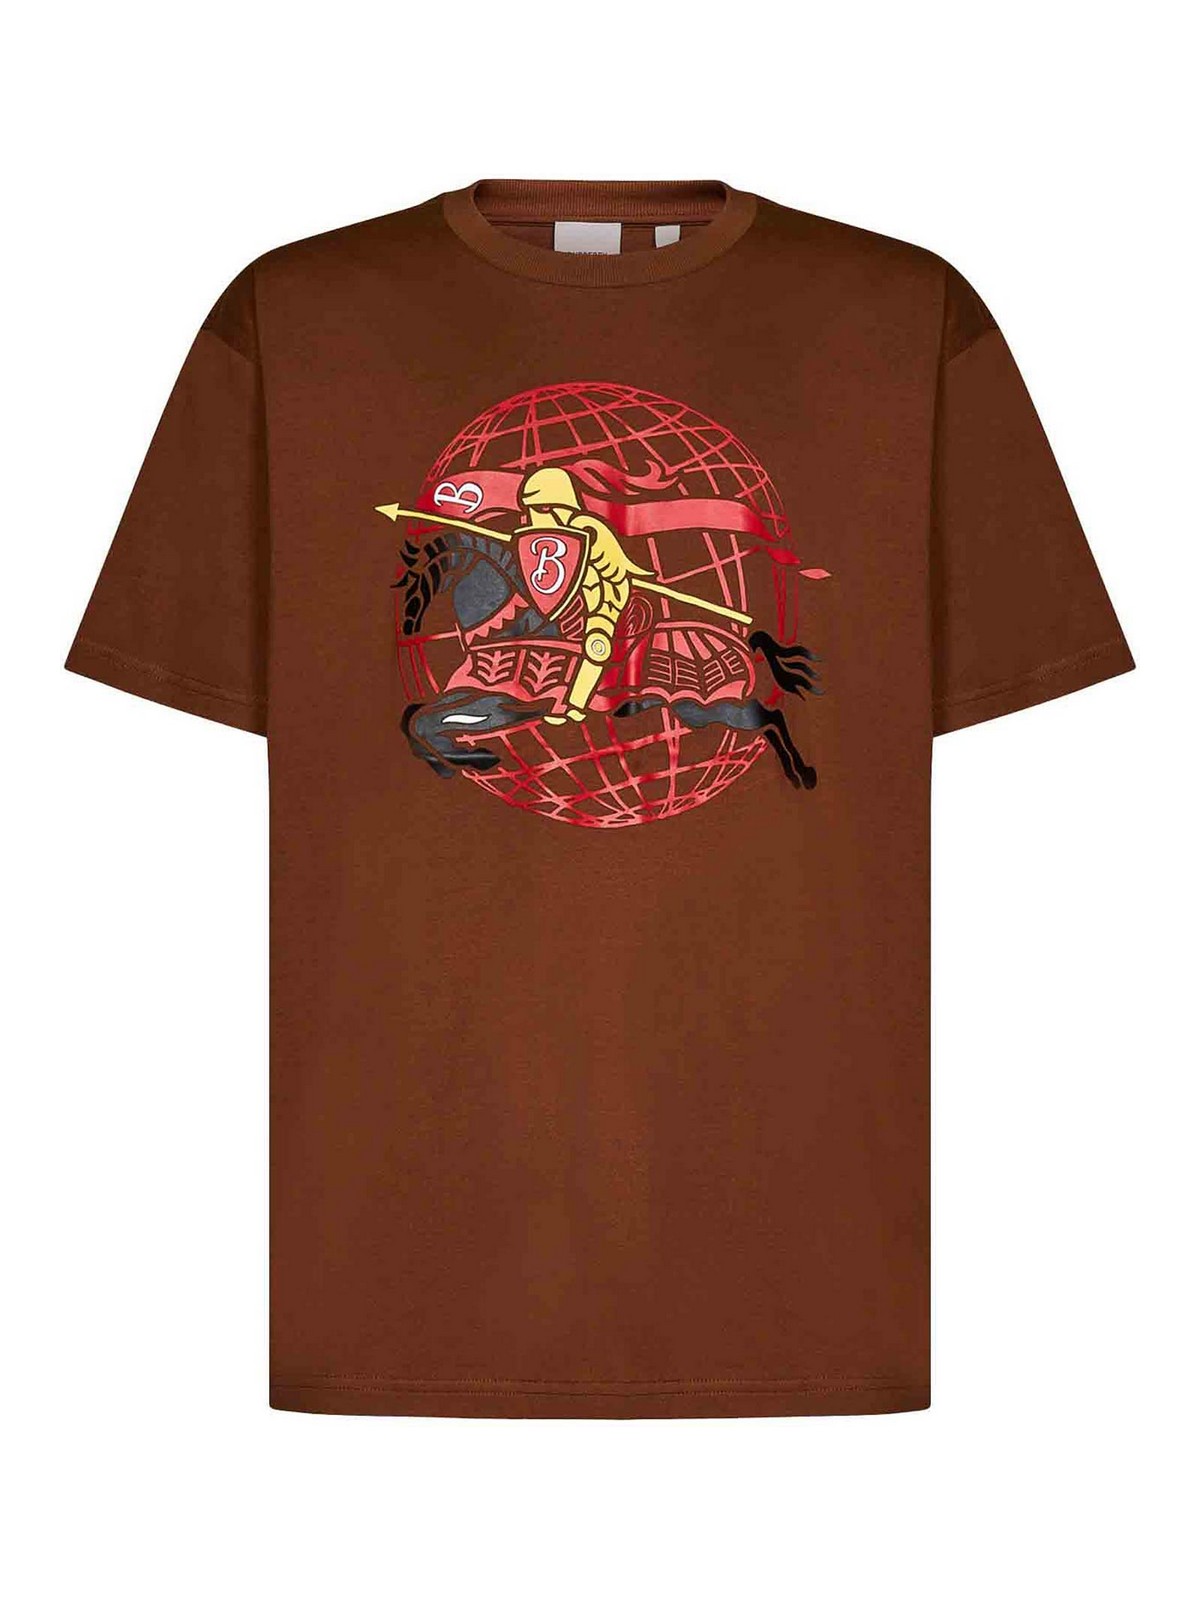 Burberry Equestrian Graphic Tee In Brown